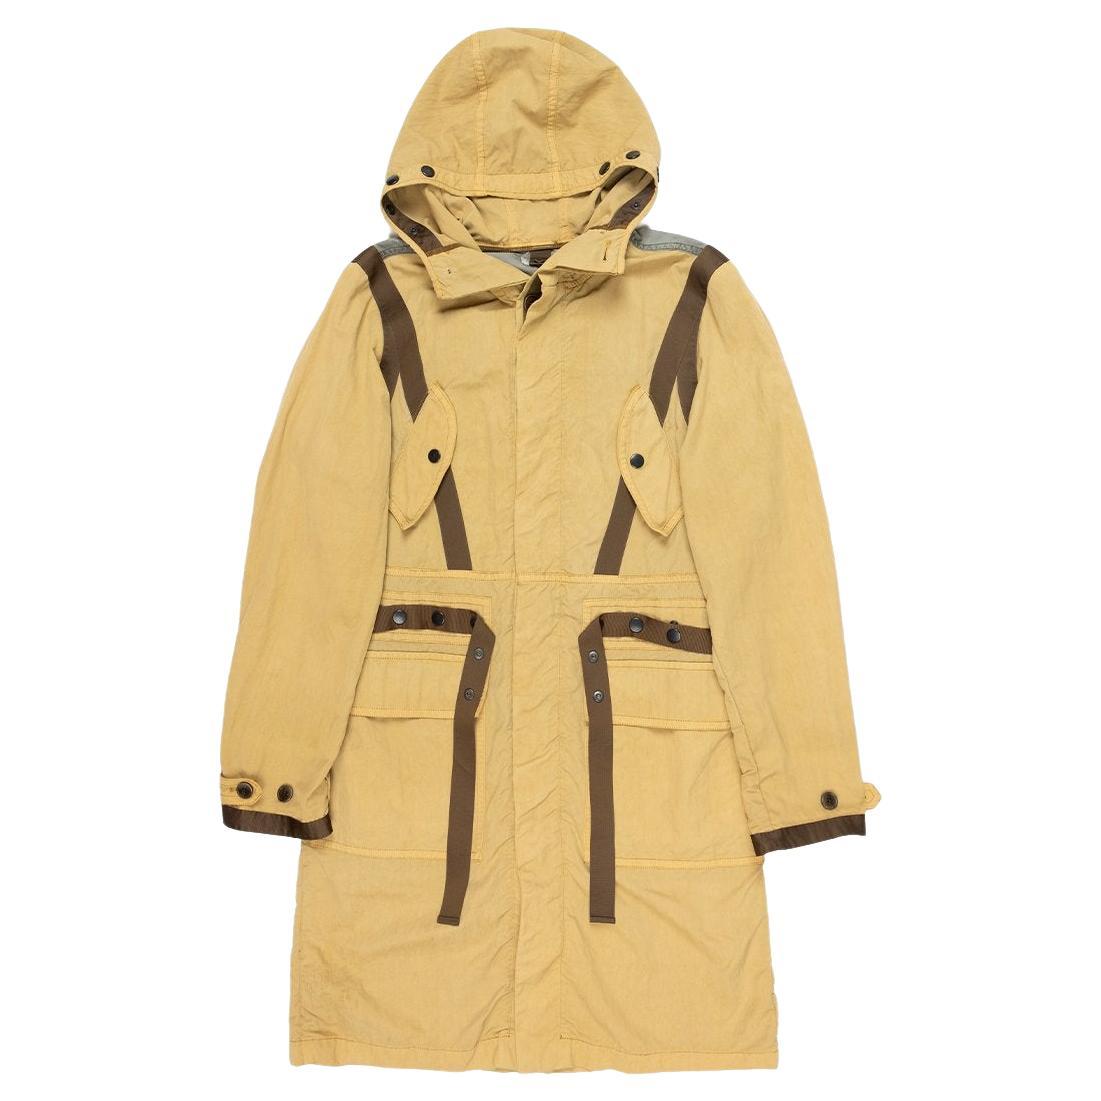 Dries Van Noten AW2014 Strapped Parka For Sale